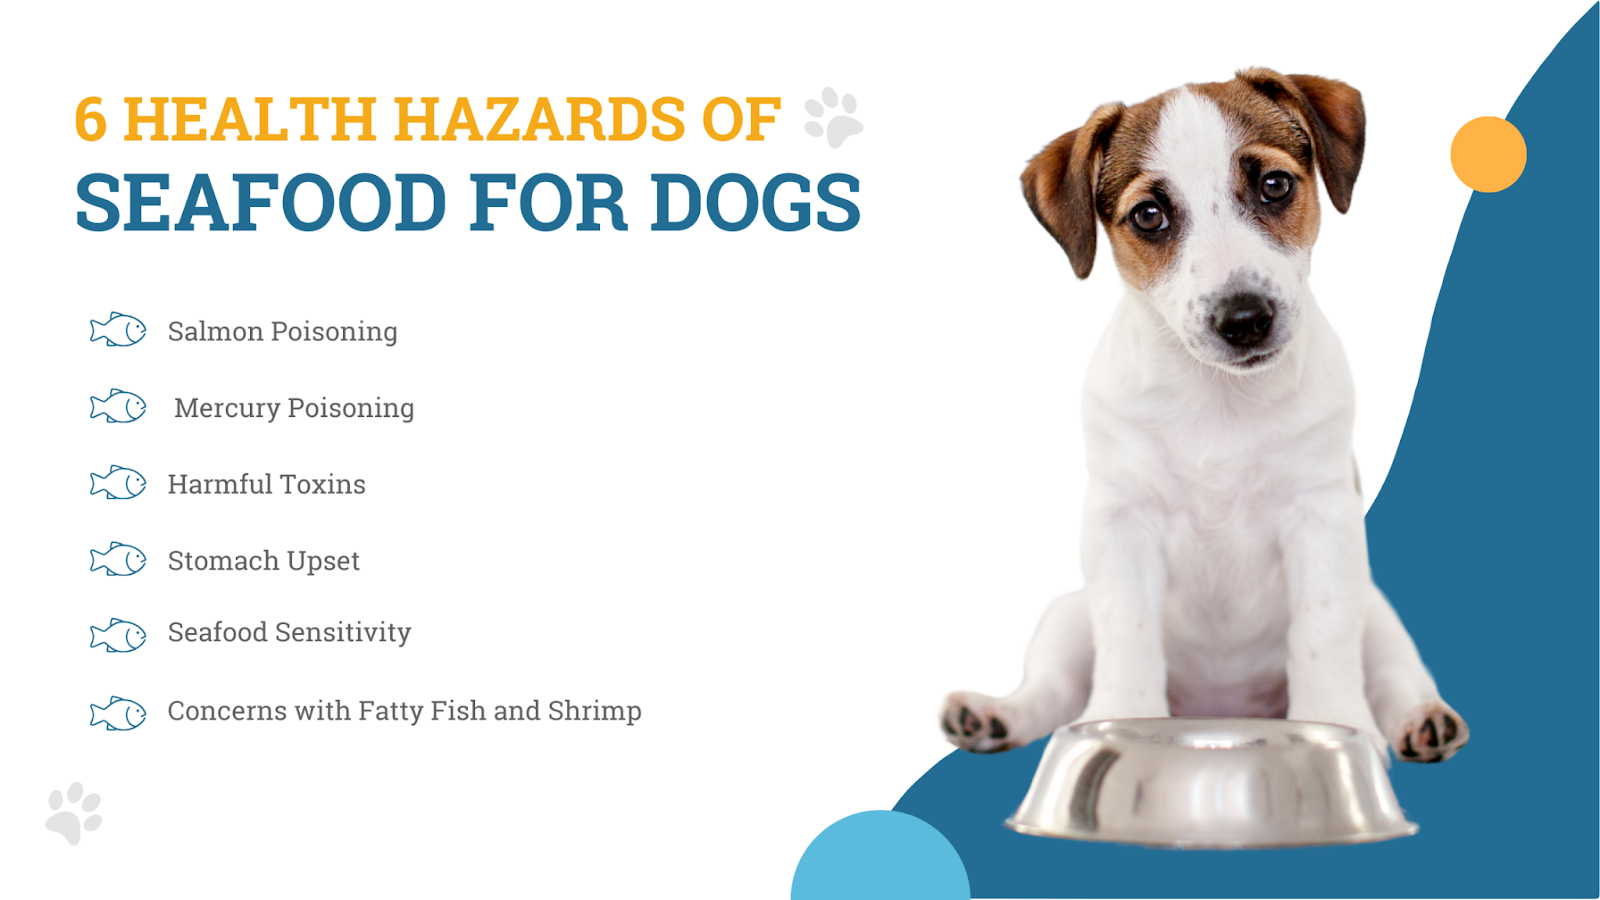 6 health hazards of seafood for dogs